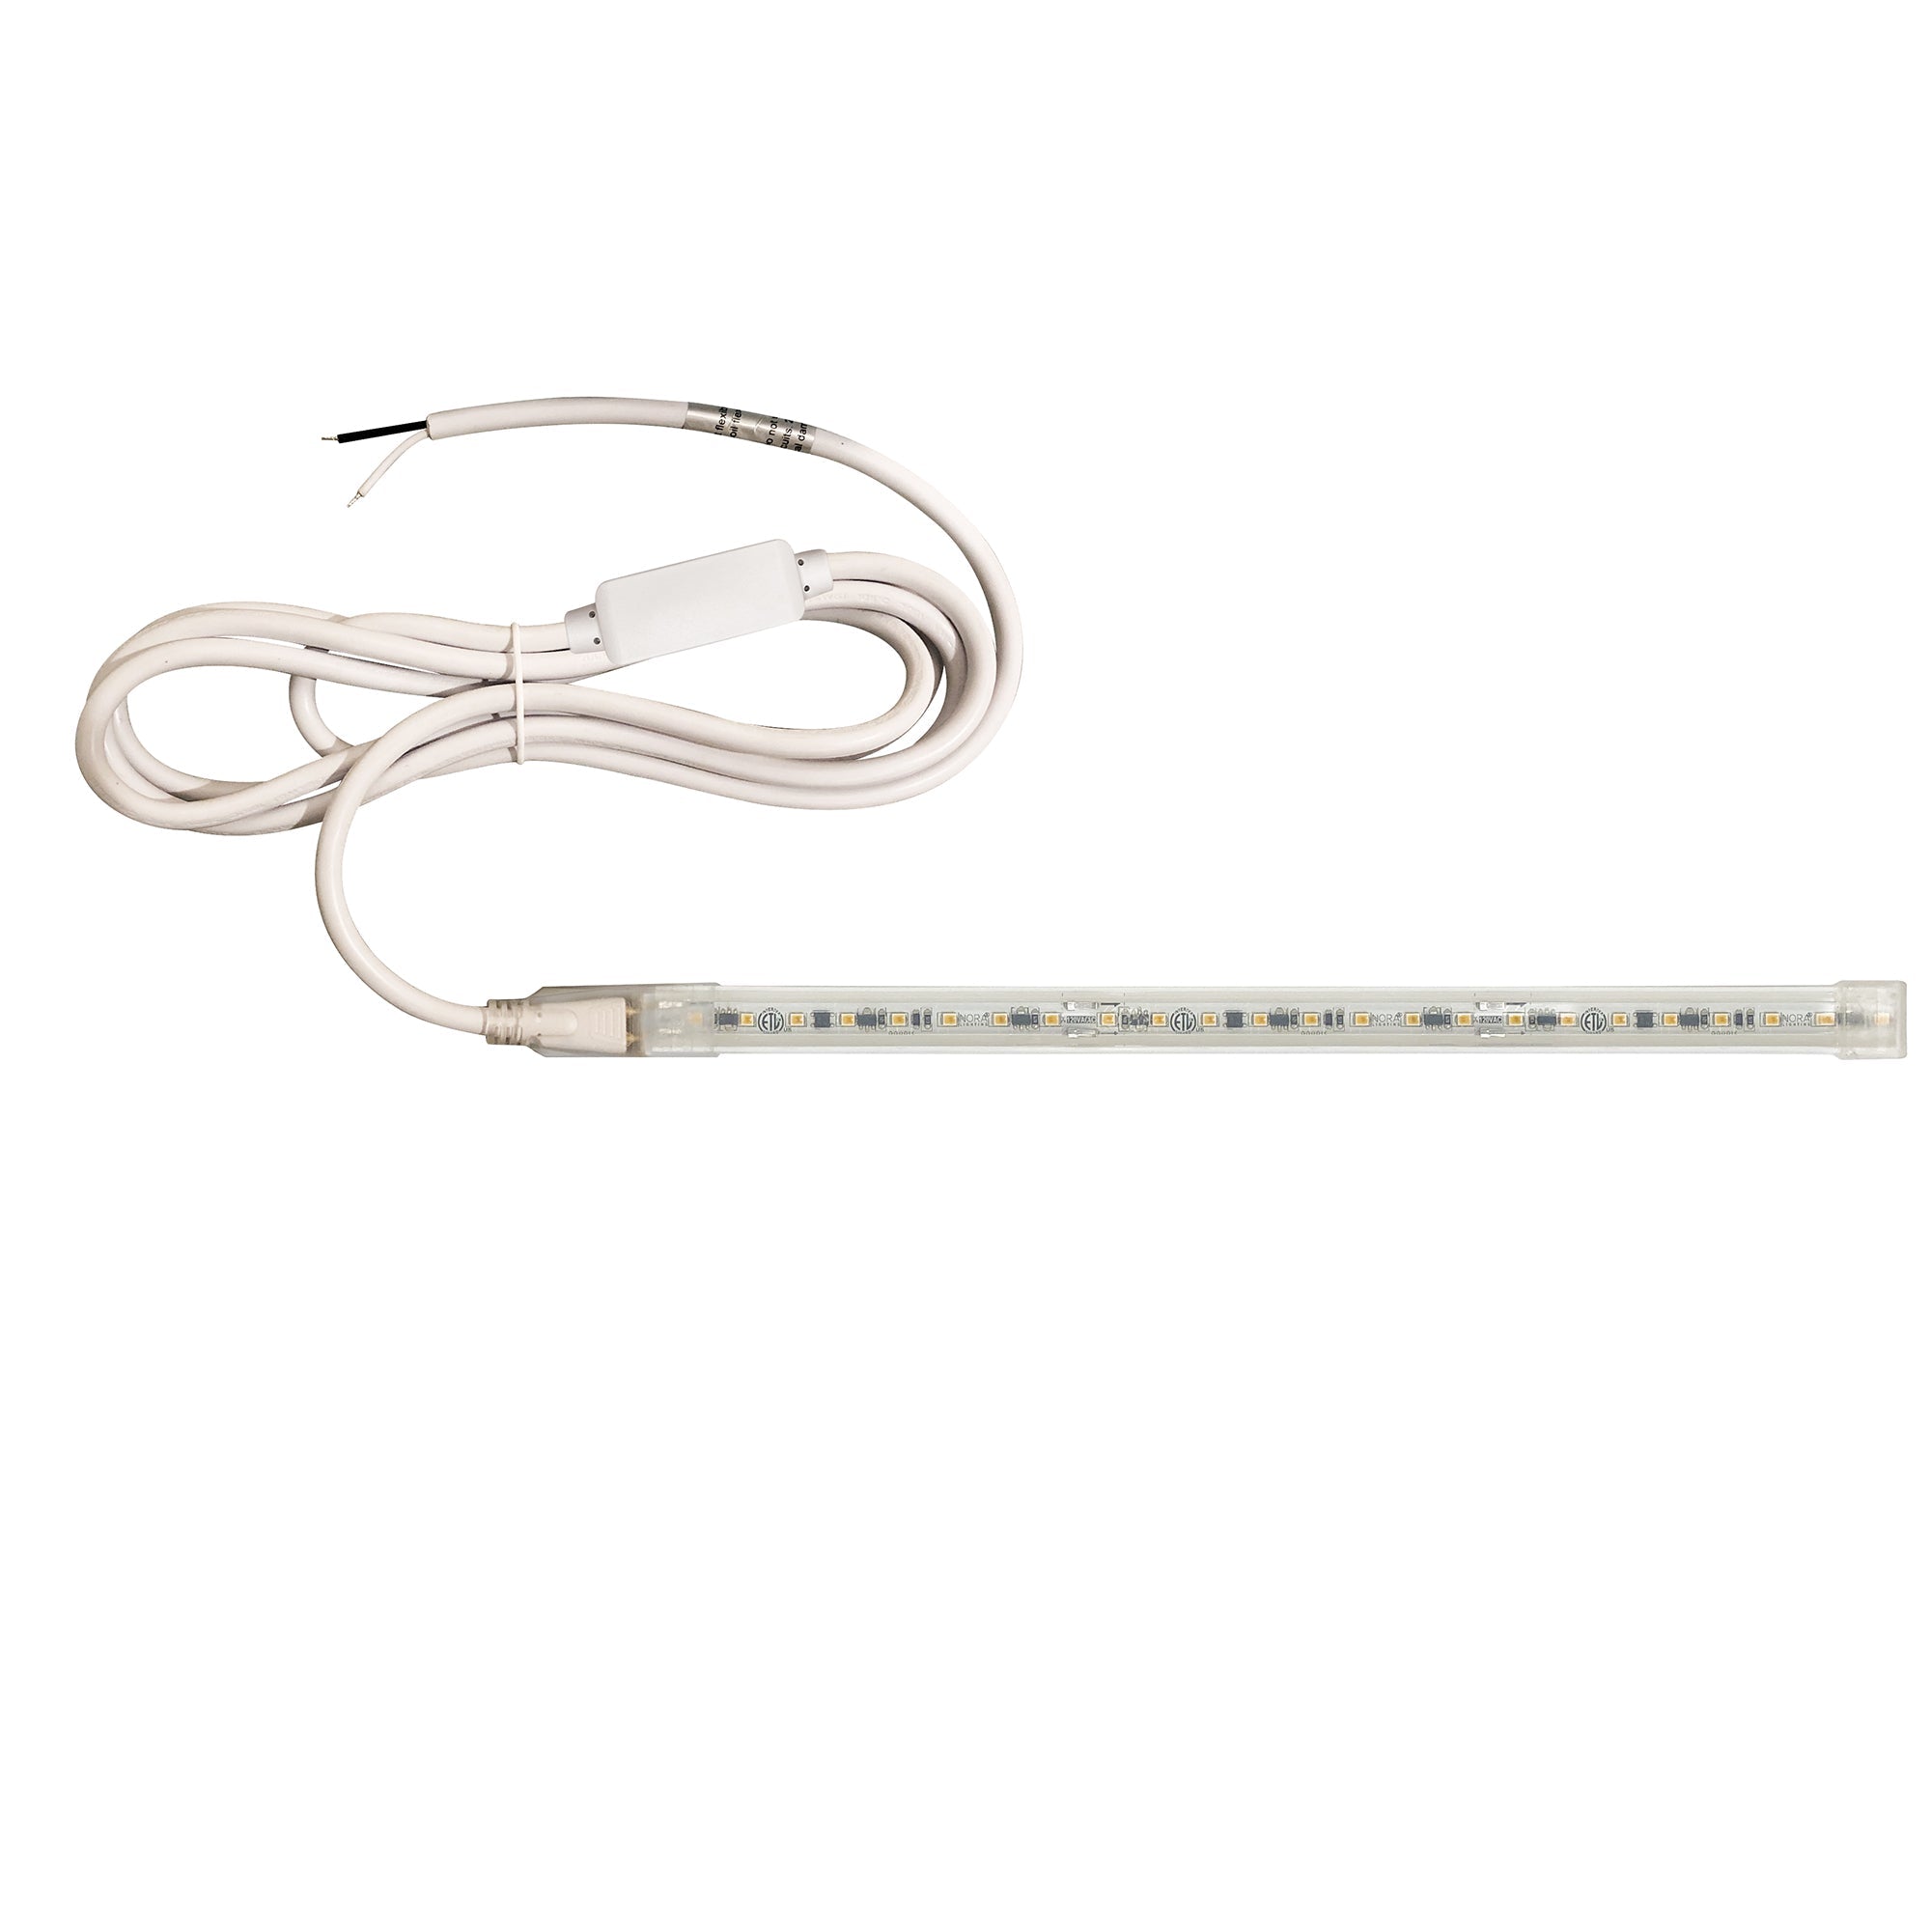 Nora Lighting NUTP13-W62-8-12-930/HWSP - Accent / Undercabinet - Custom Cut 62-ft, 8-in 120V Continuous LED Tape Light, 330lm / 3.6W per foot, 3000K, w/ Mounting Clips and 8' Hardwired Power Cord w/ Surge Protector